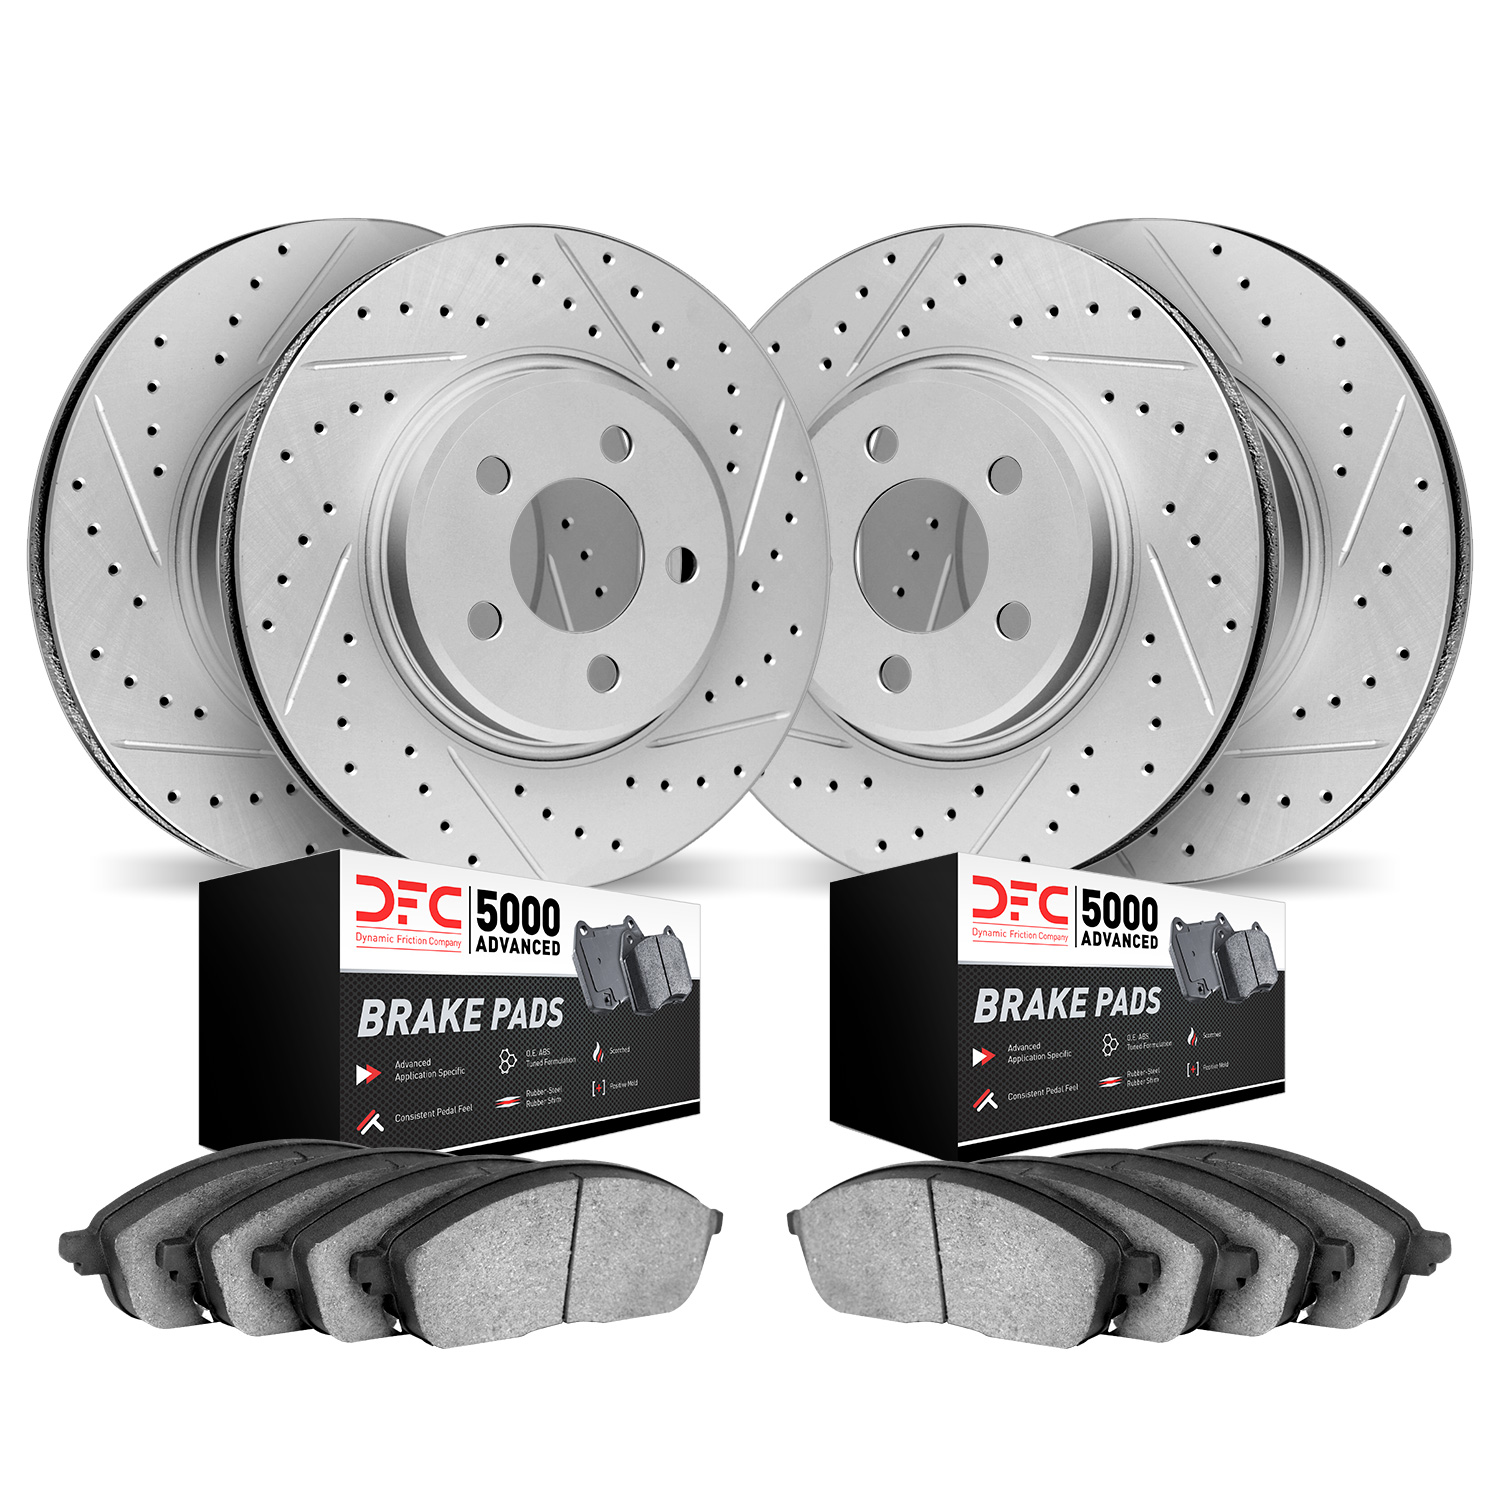 2504-75007 Geoperformance Drilled/Slotted Rotors w/5000 Advanced Brake Pads Kit, Fits Select Lexus/Toyota/Scion, Position: Front